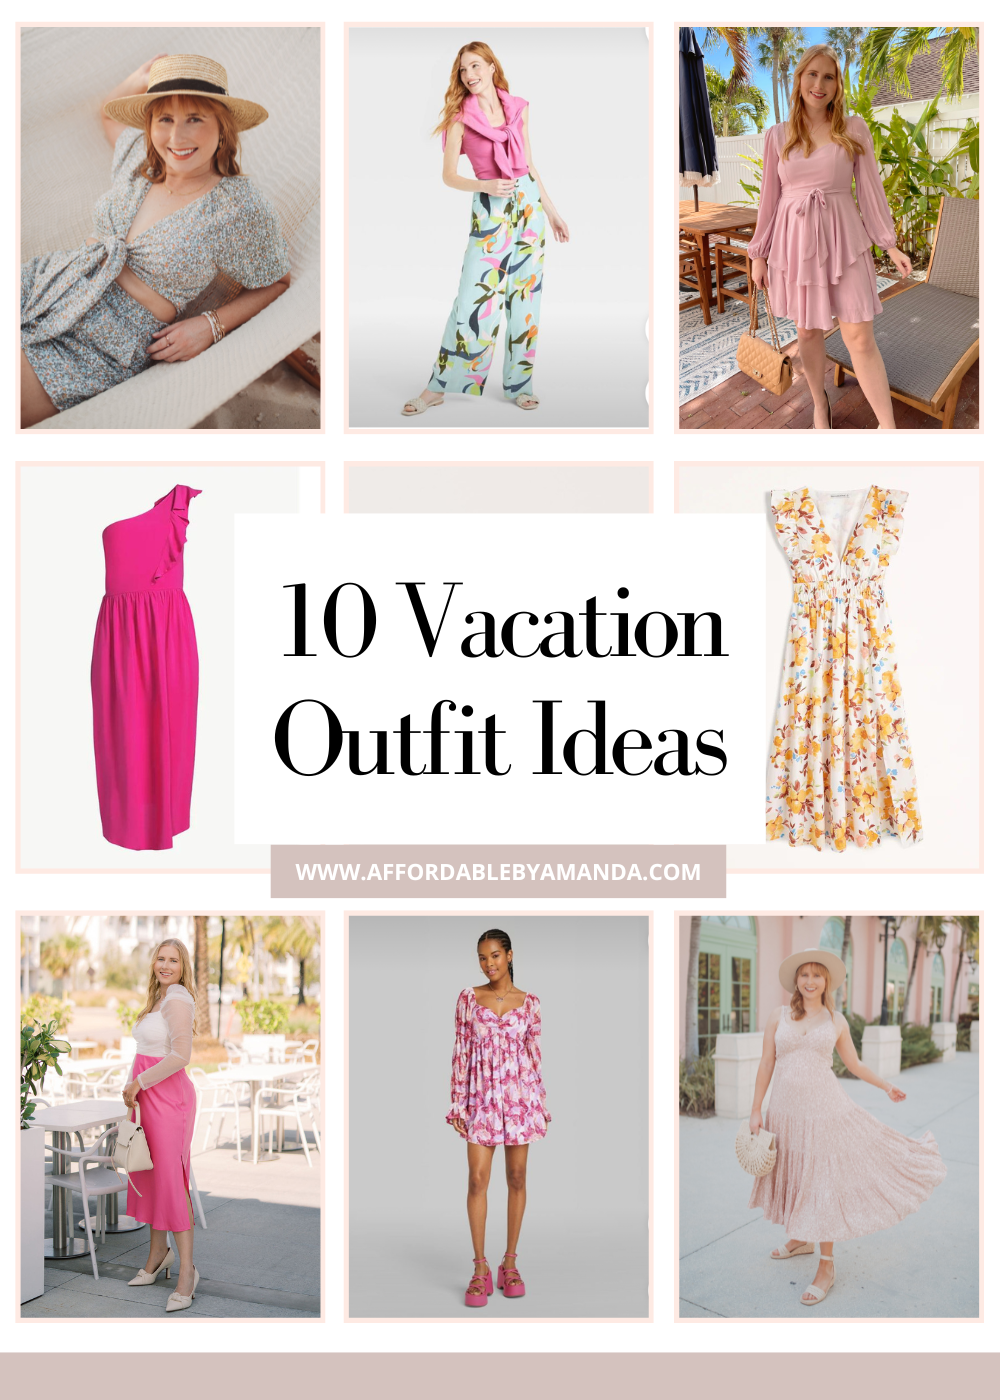 10 Vacation Outfit Ideas 2023 - Beach Vacation Outfits 2023. Summer Vacation Outfits 2023. Tropical Vacation Outfit Ideas.